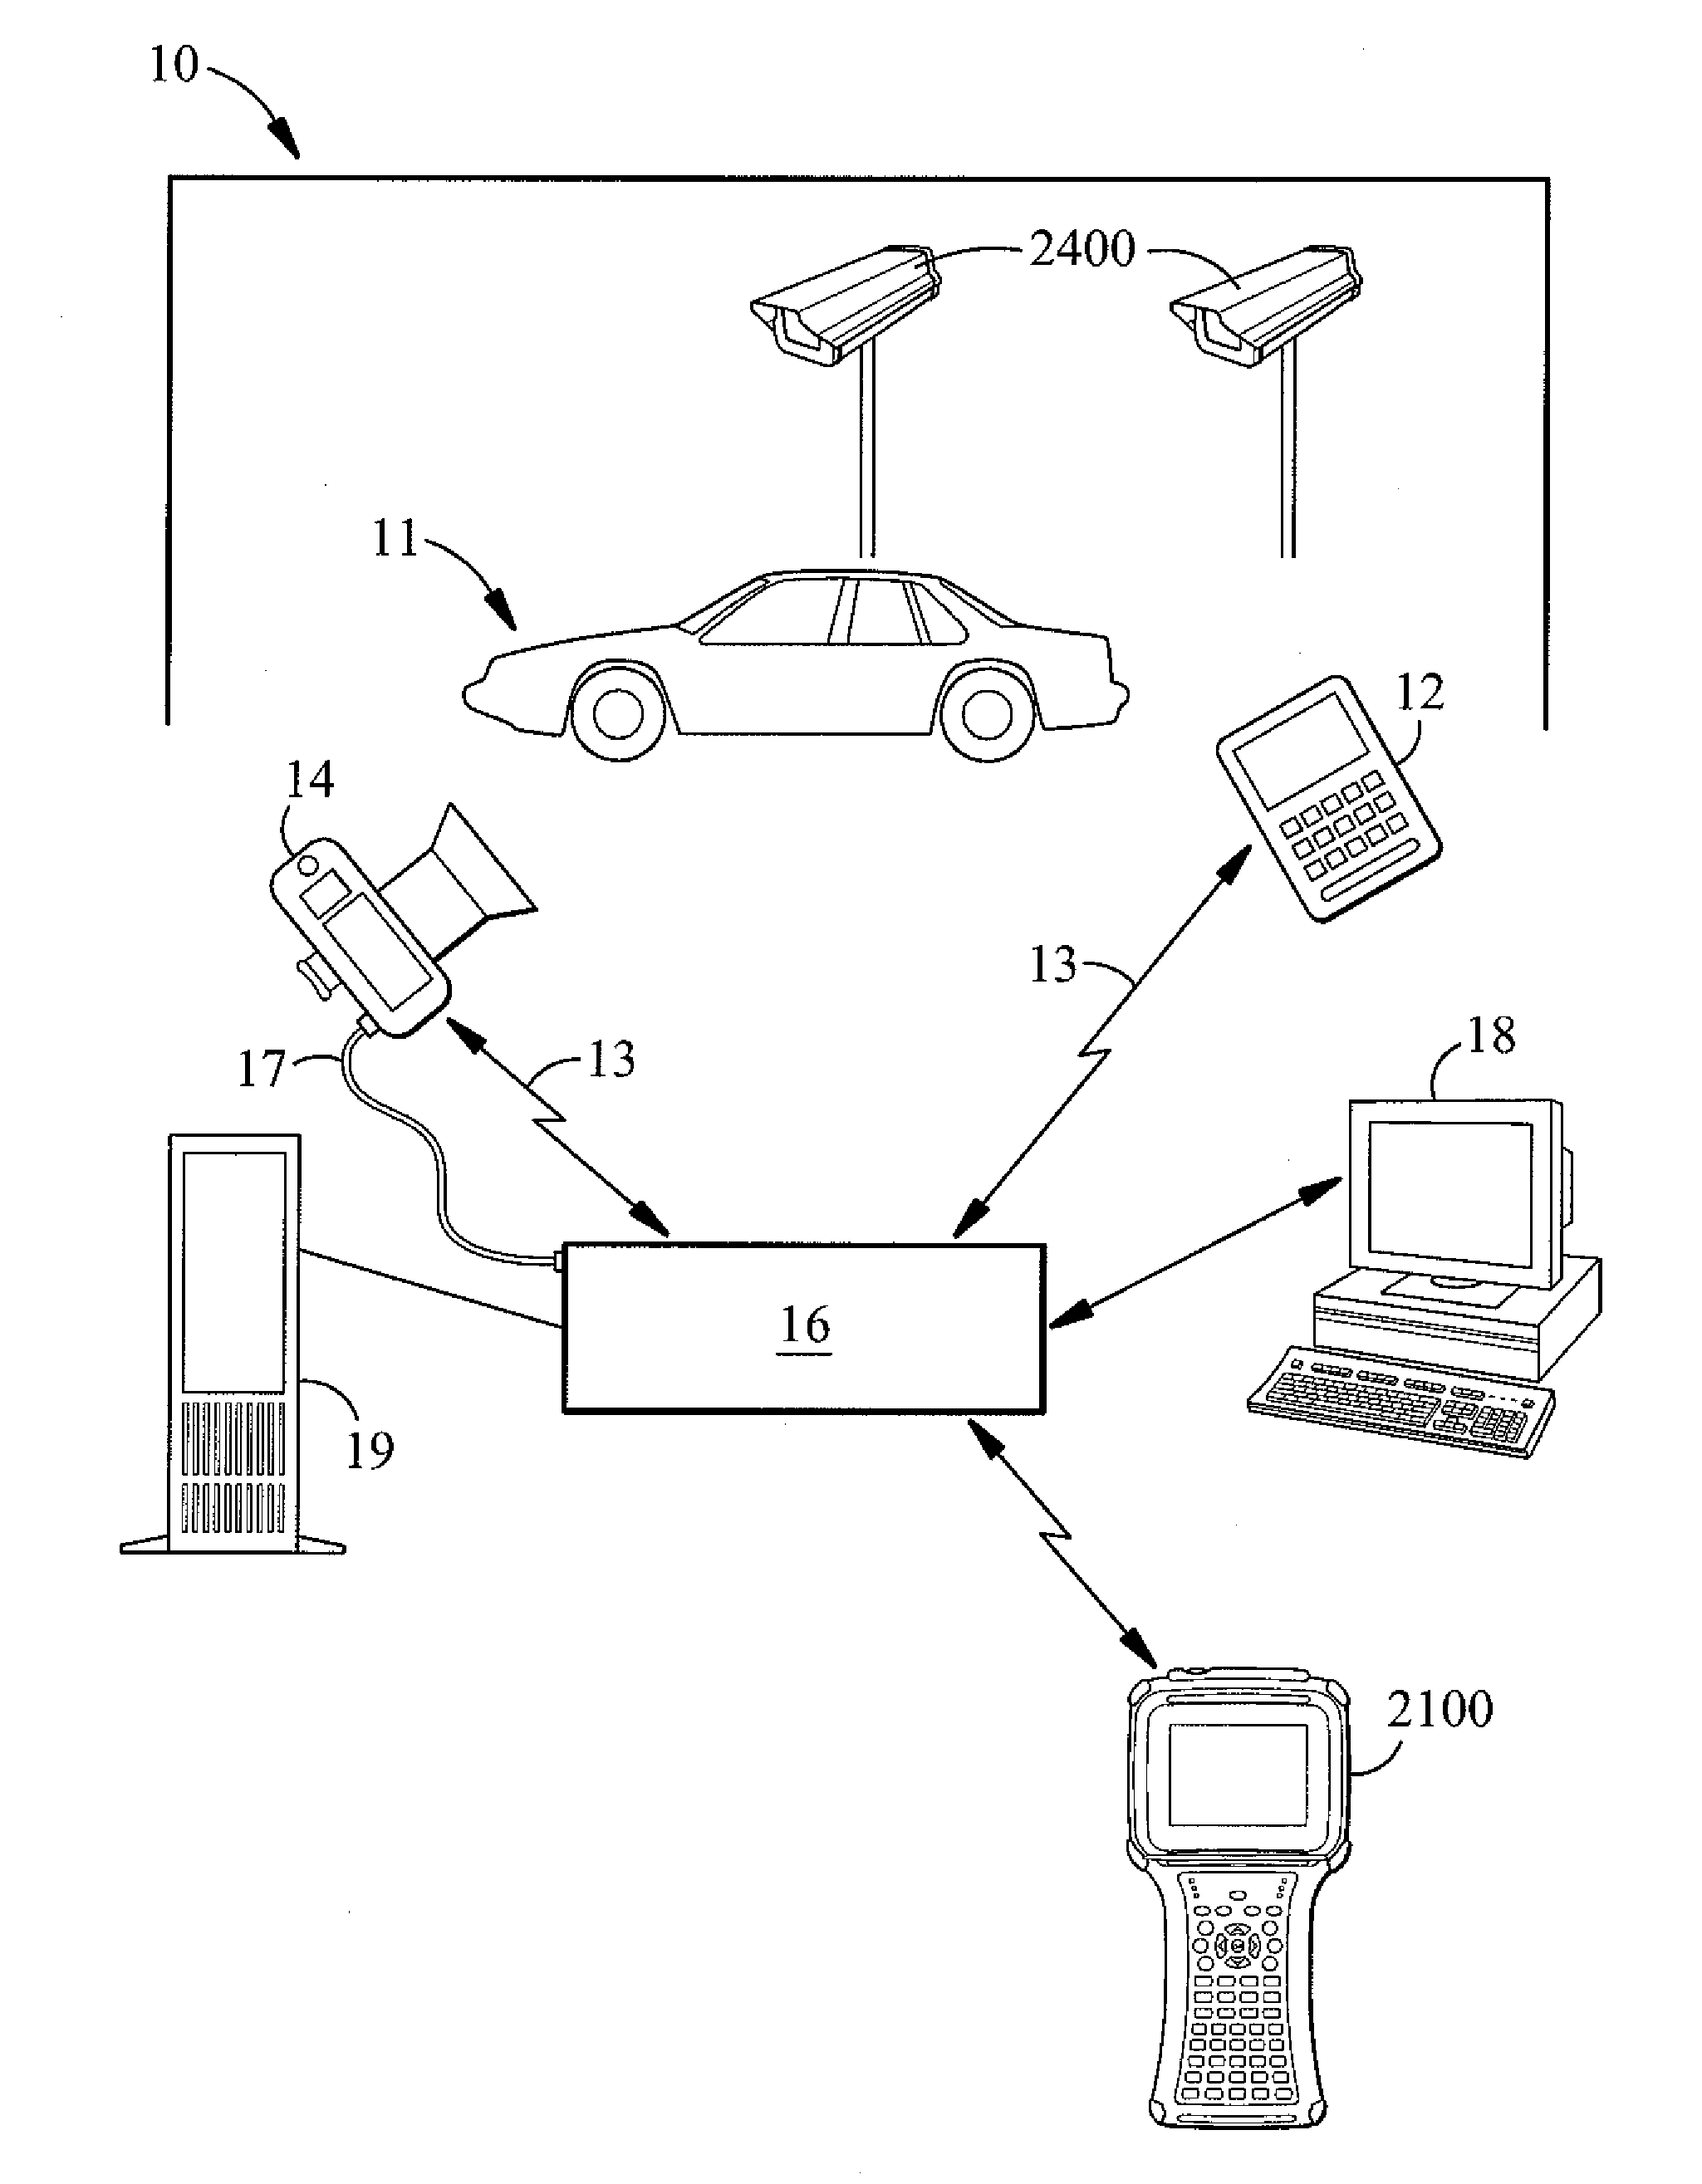 Automated Vehicle Check-In Inspection Method and System With Digital Image Archiving